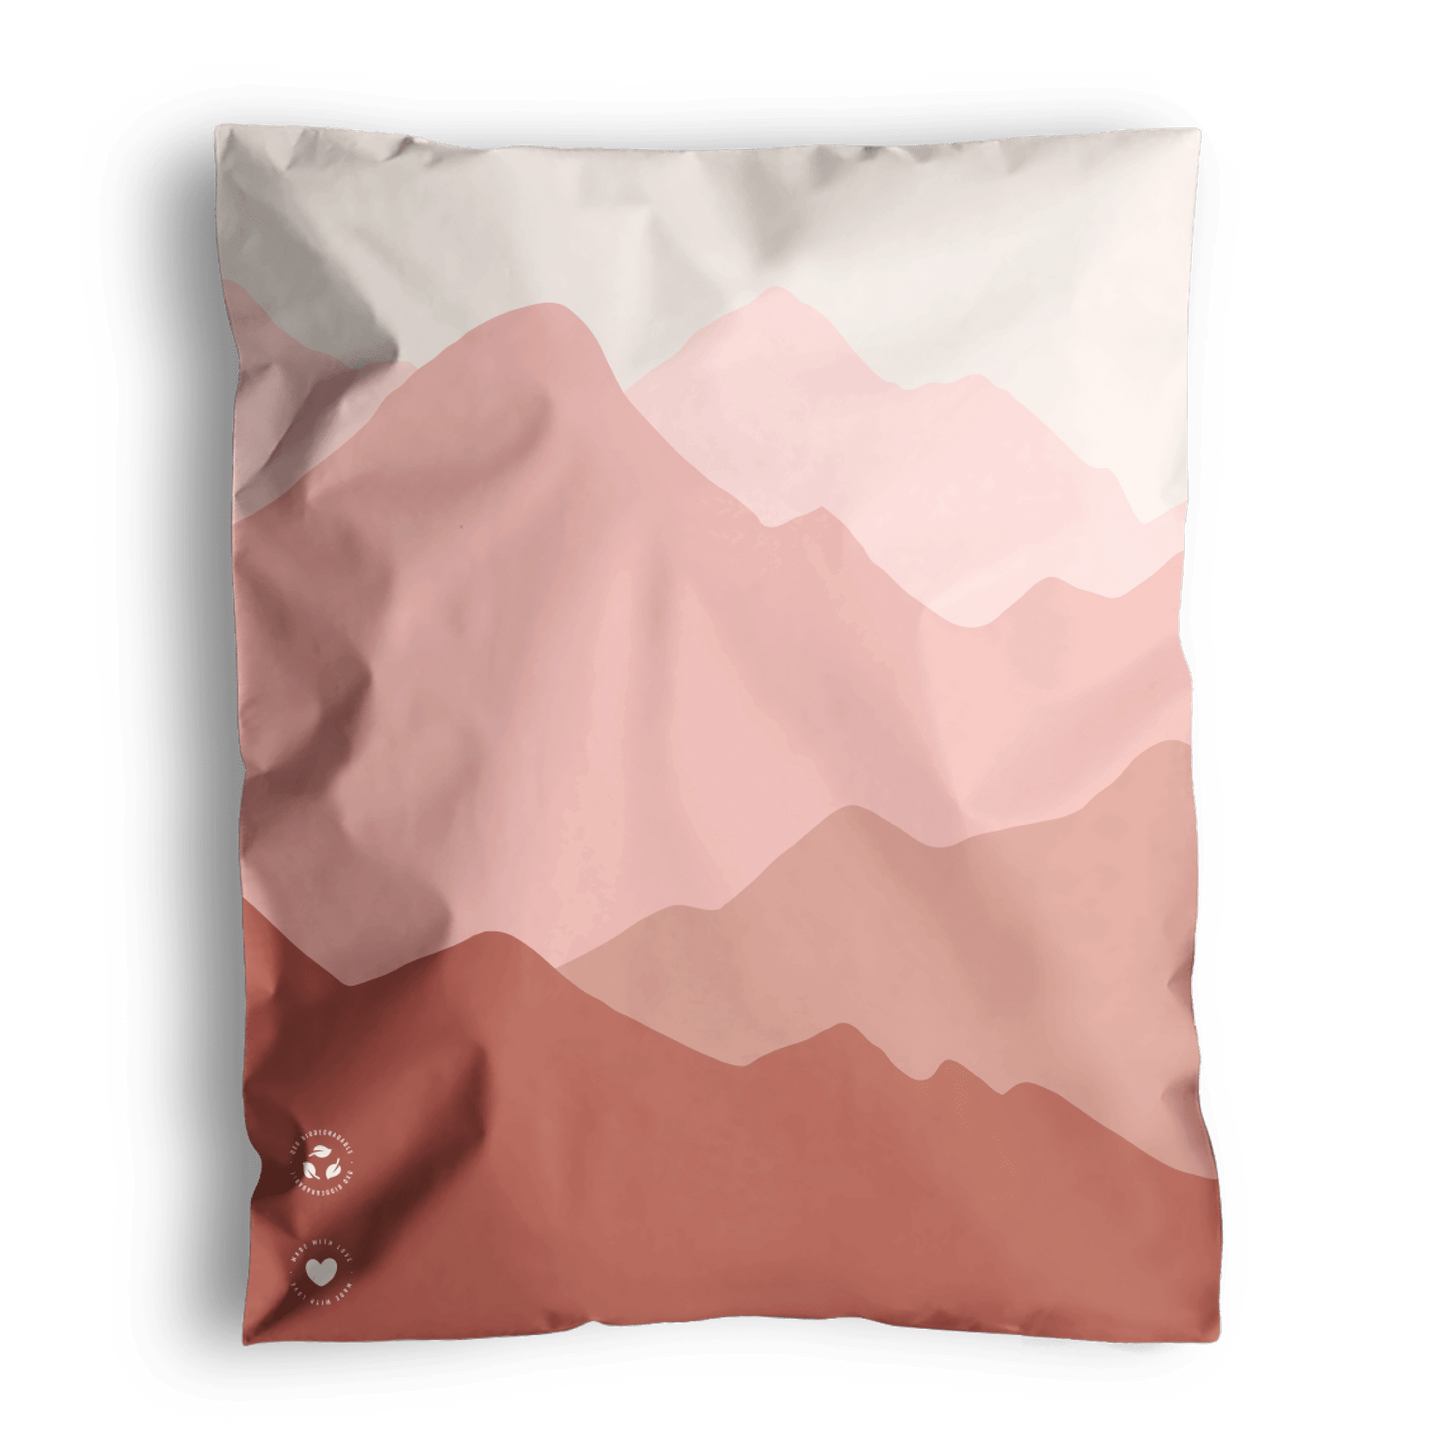 A graphic print cushion with a mountain landscape design in shades of pink and white, shipped in impack.co Mountain Clay Mailers 10" x 13".